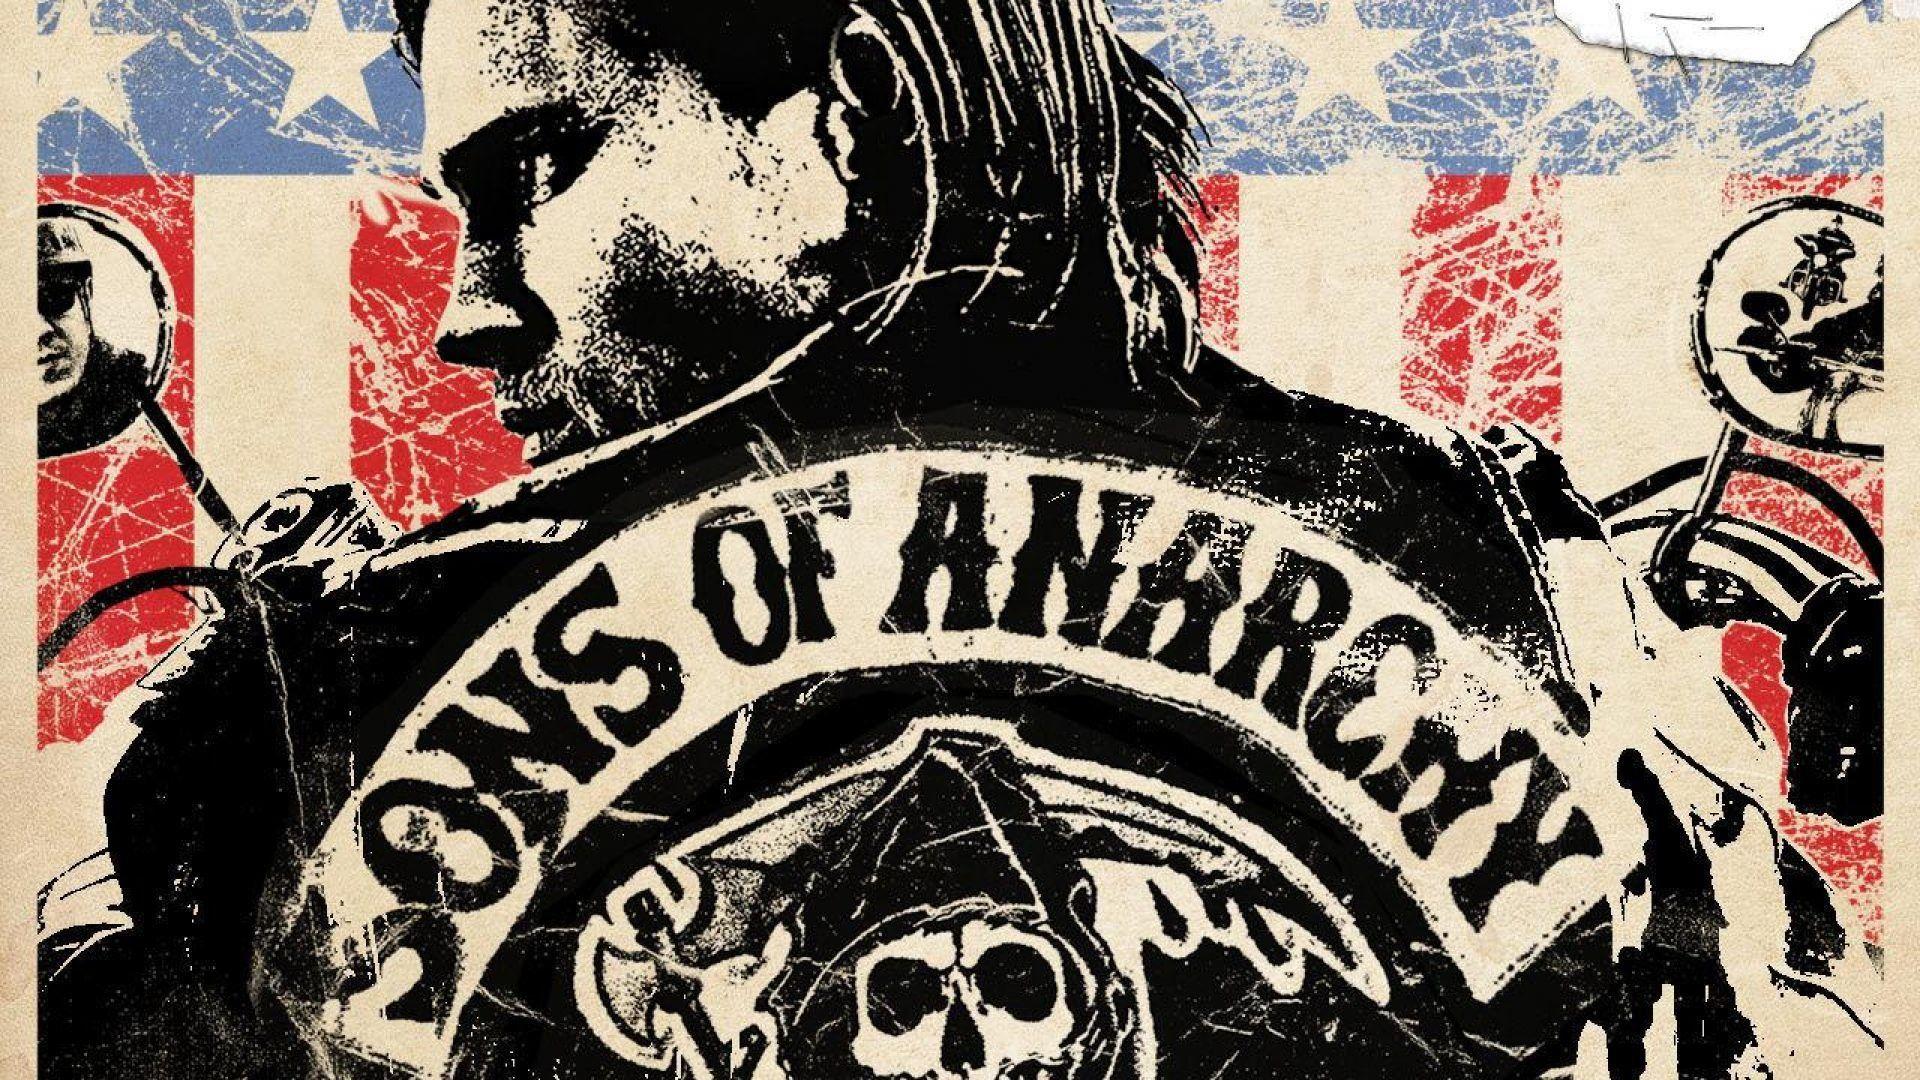 Sons Of Anarchy Wallpaper. Beautiful Sons Of Anarchy Wallpaper